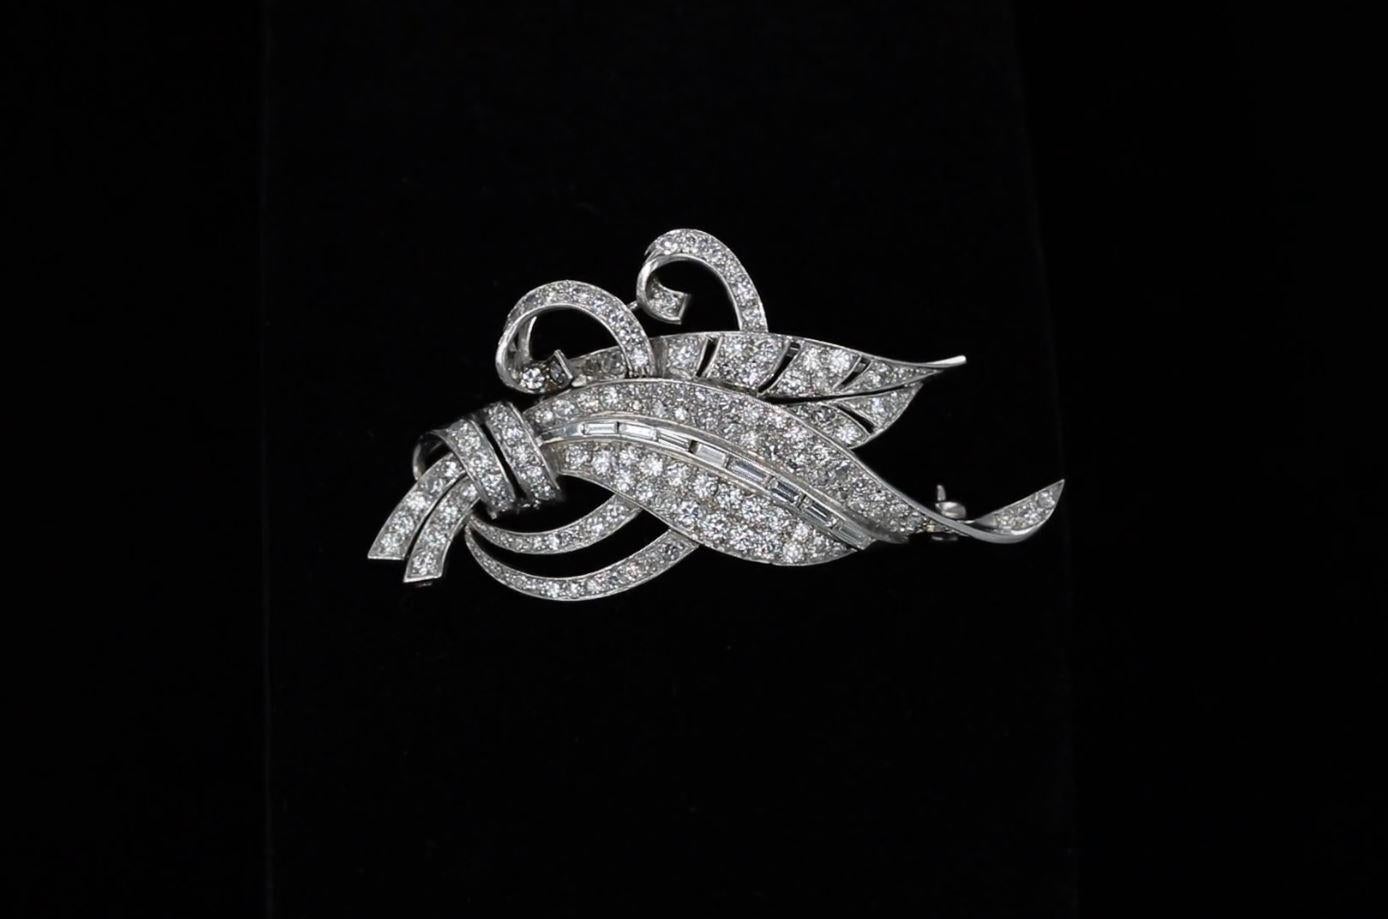 The graceful curves of leaves and flowing ribbons glint and gleam in this estate diamond brooch. The pin contains approximately 128 round and 8 baguette diamonds altogether weighing approximately 3.00 carats. The diamonds have an average color of F